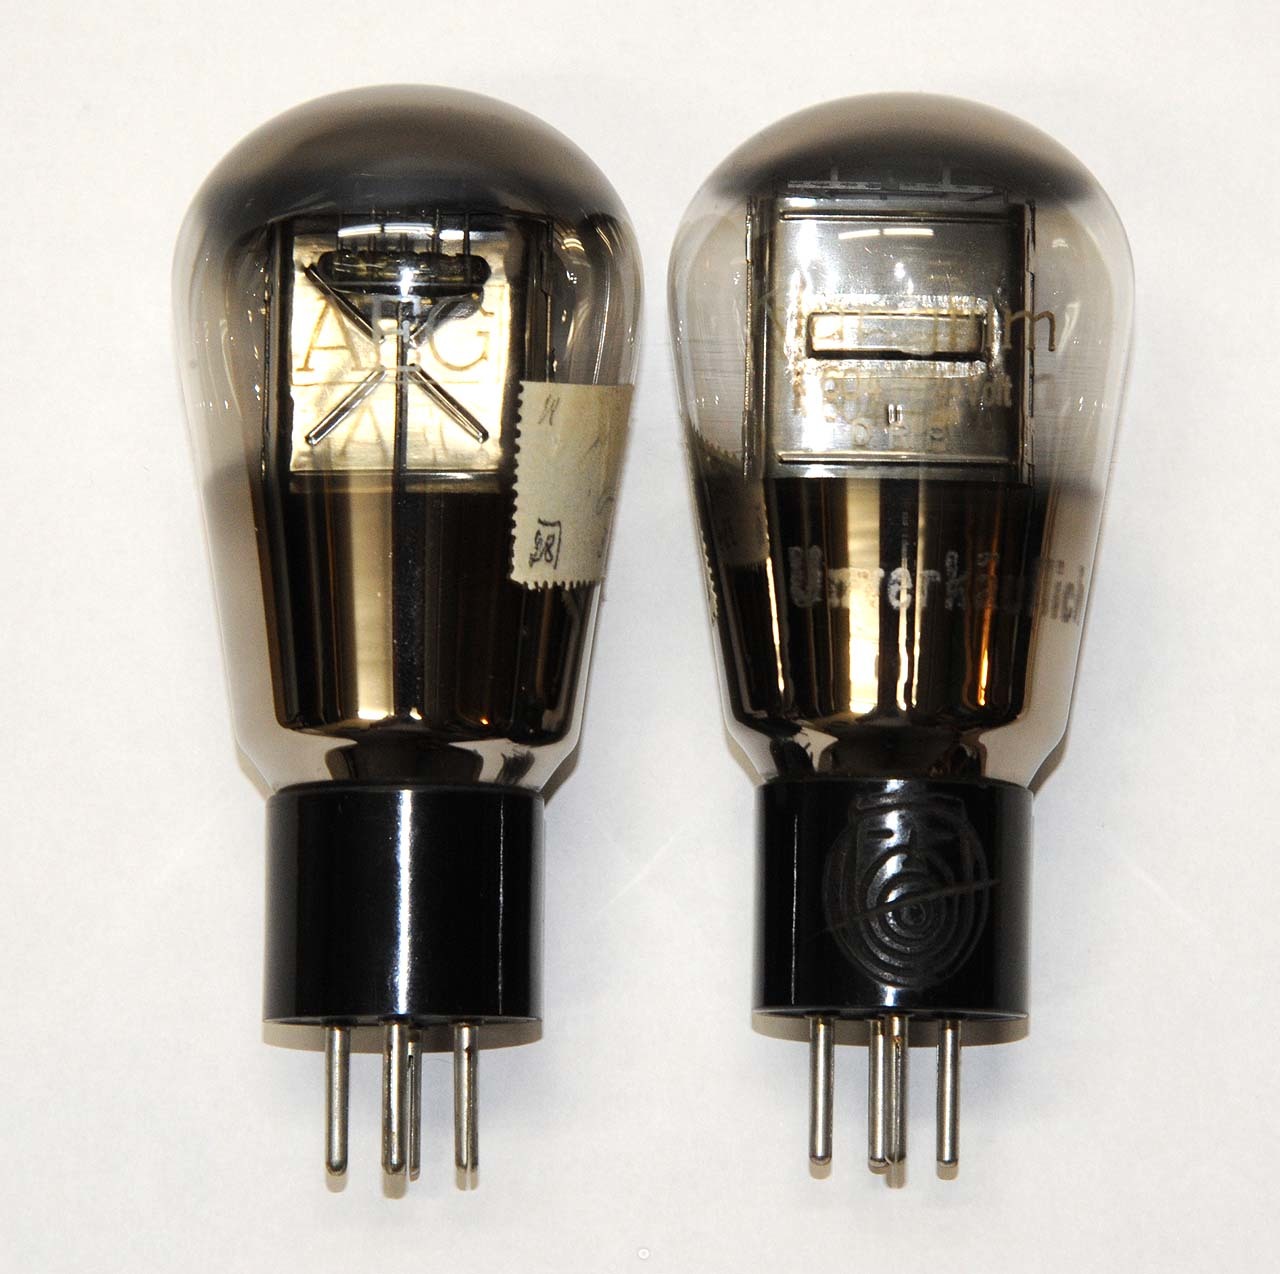 AEG K604 vacuum tubes (Klangfilm version of Telefunken RE604) used at the final stage of Zetton amps